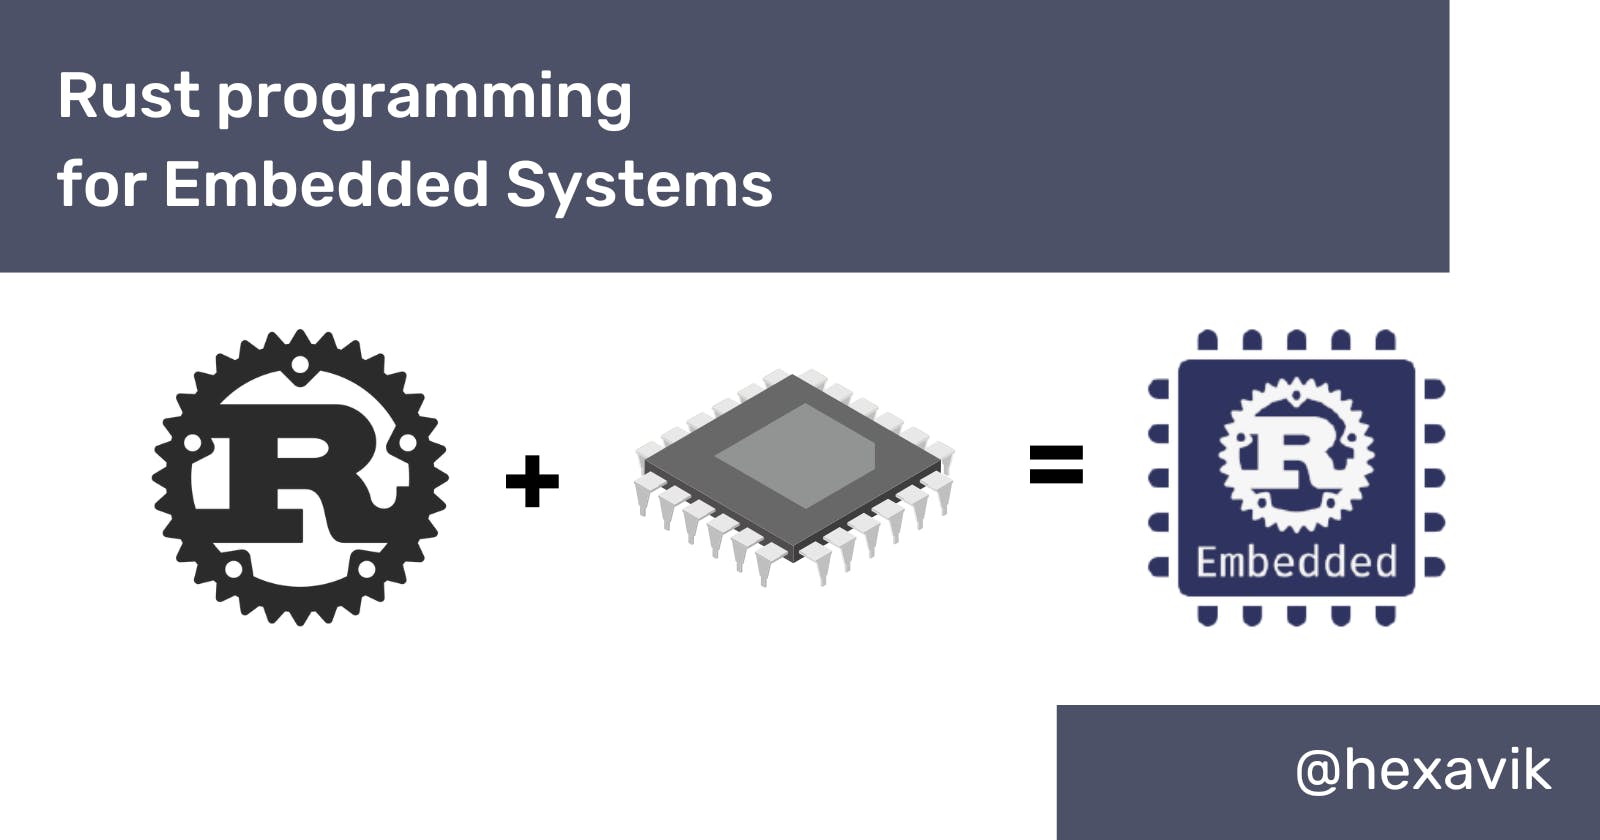 Why is Rust used as an embedded system programming language?